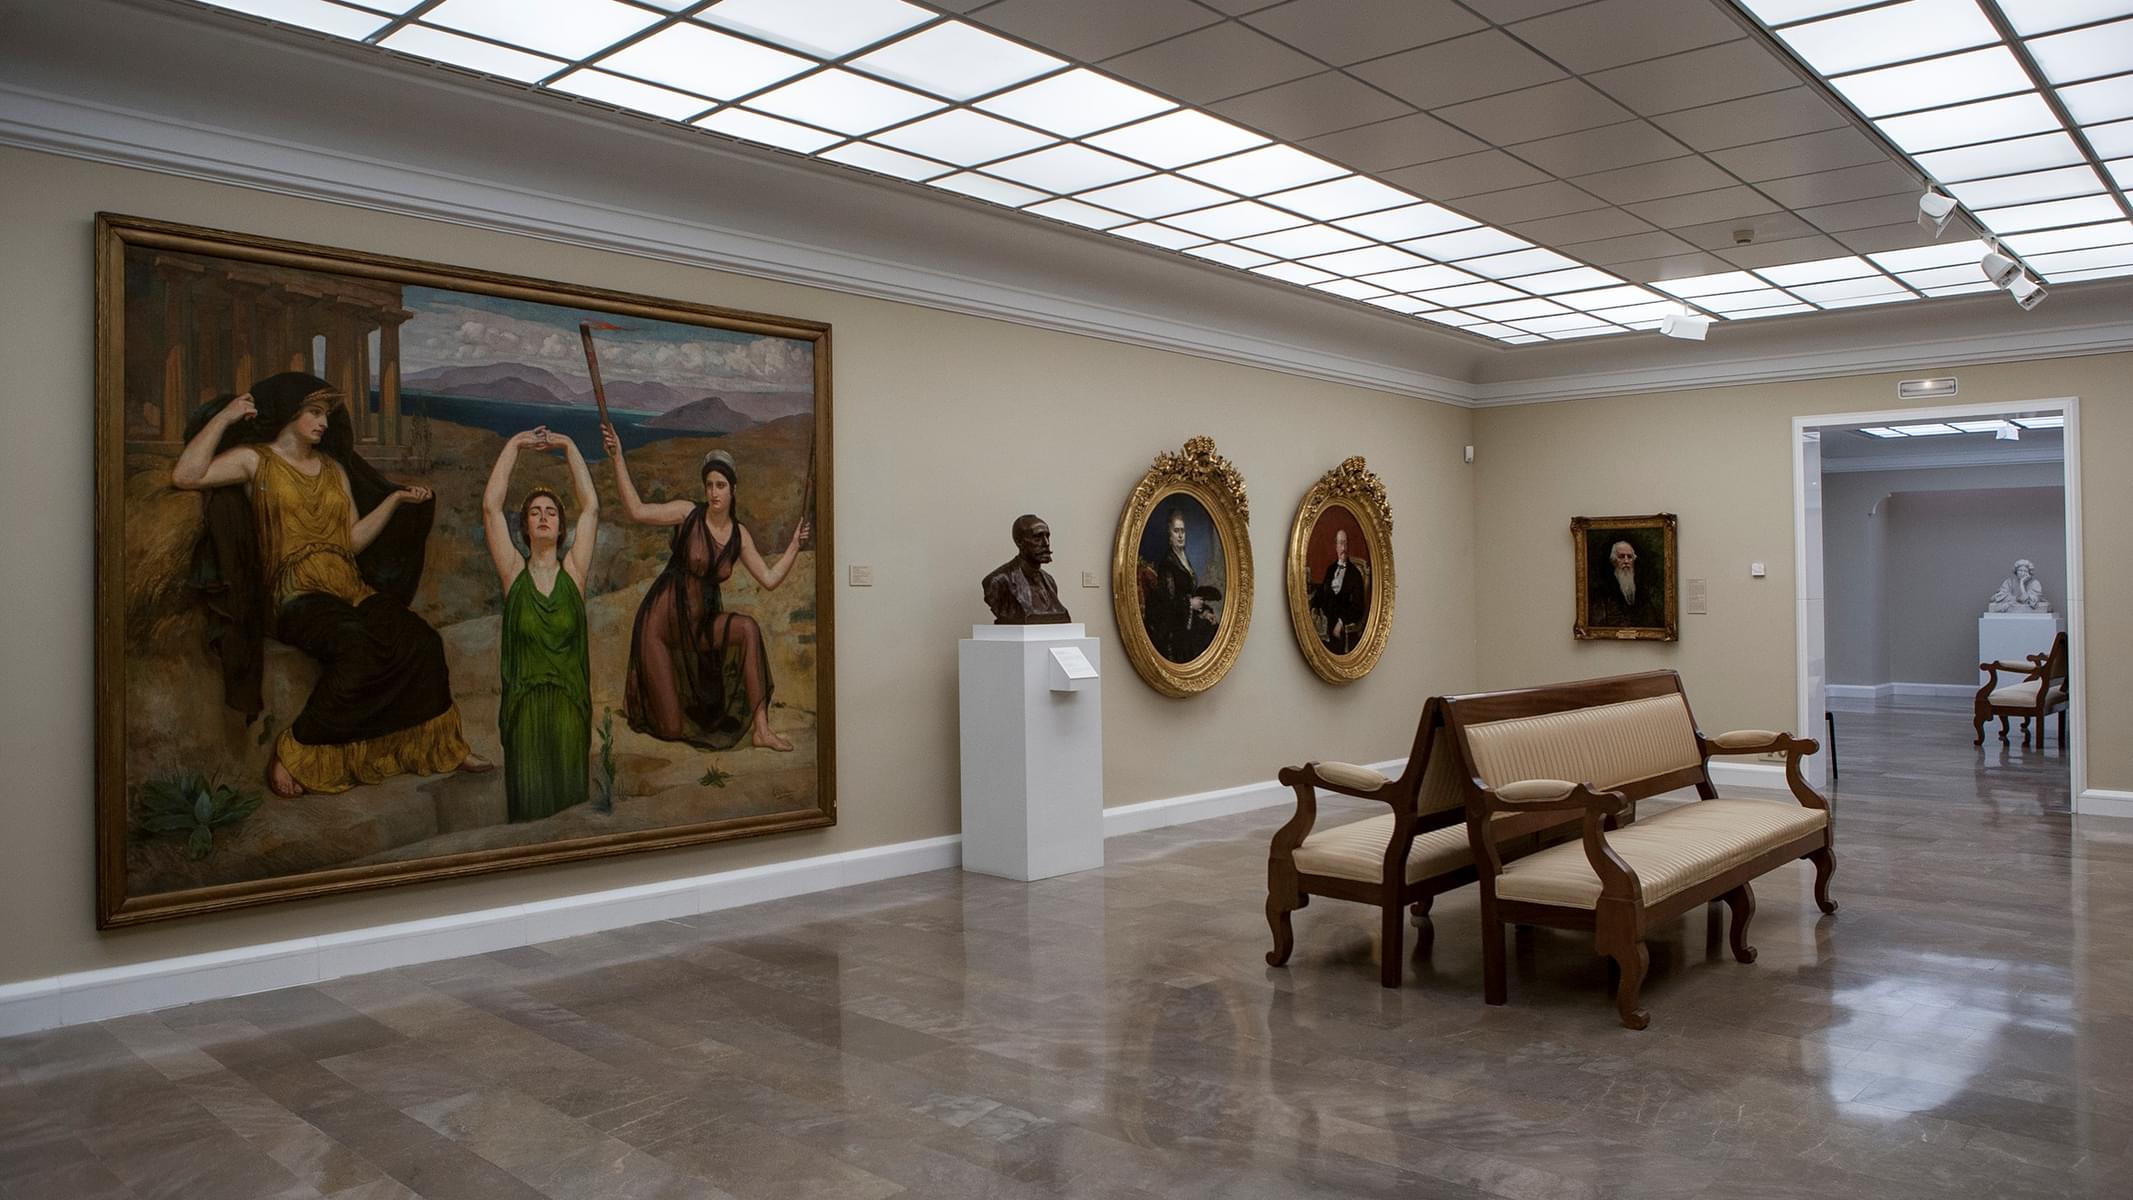 Gaze at the permanent collection and incredible work of famous artists